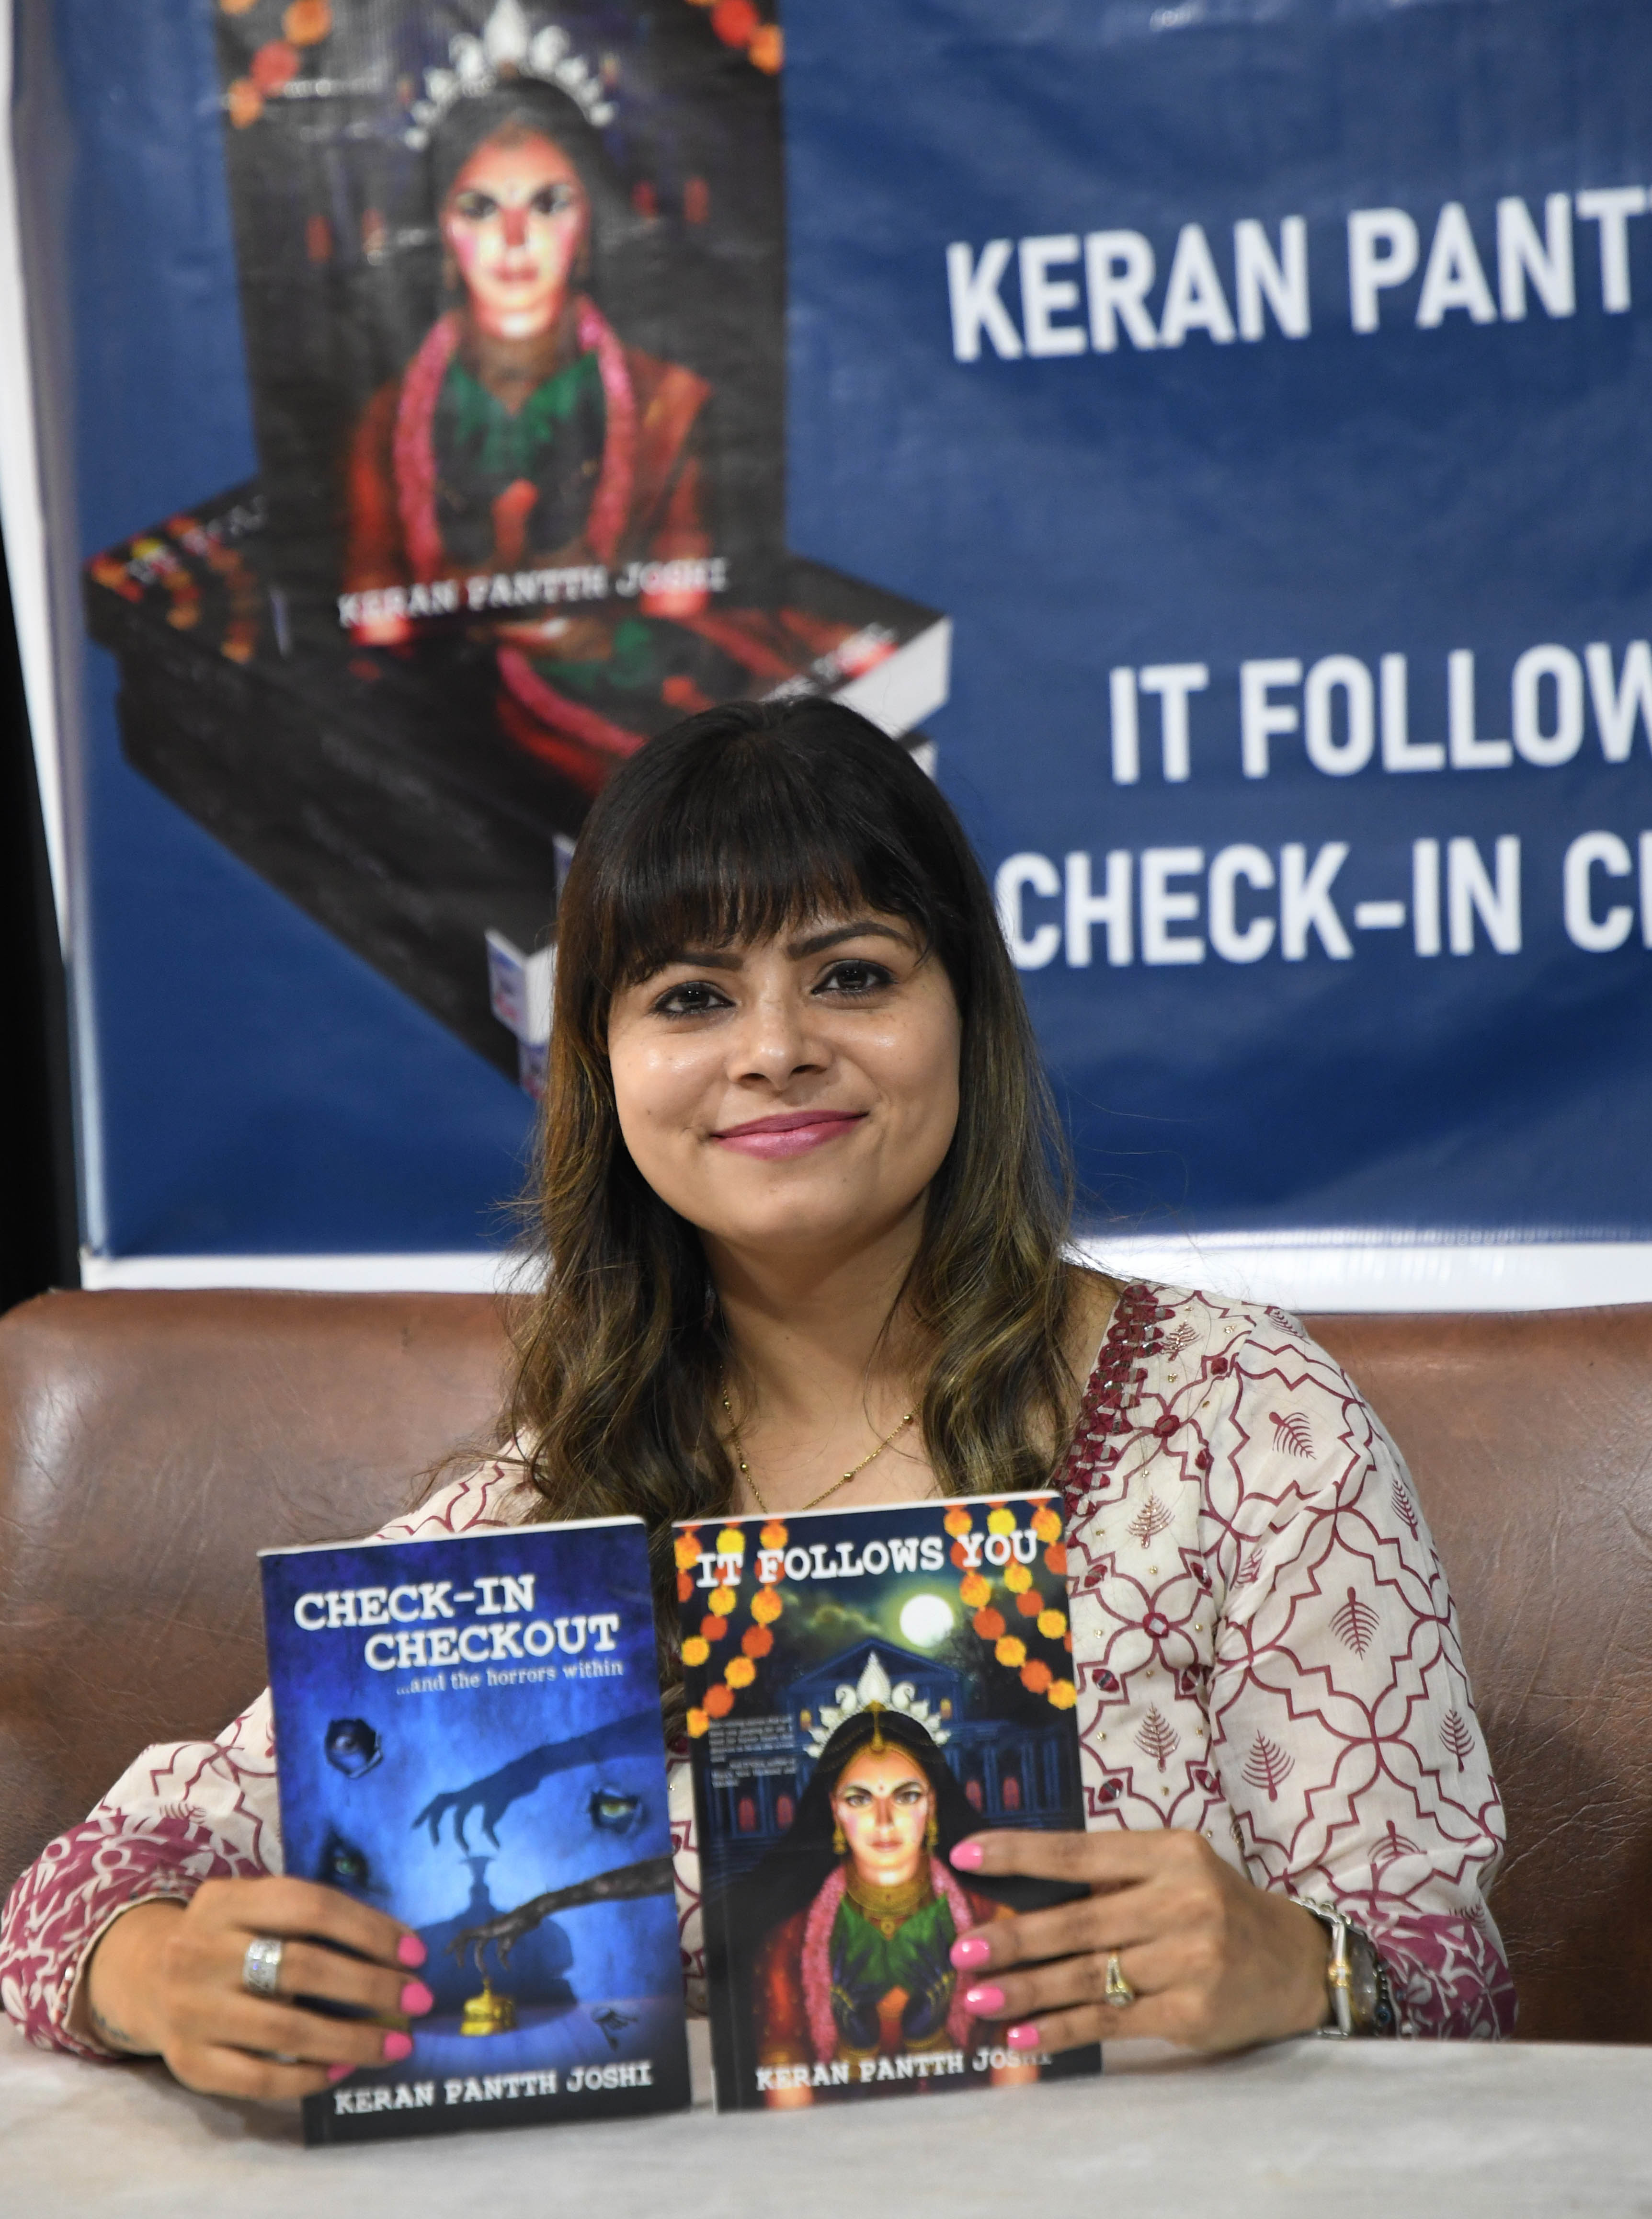 Keran Pantth Joshi's latest book Check-in Checkout is an anthology of stories